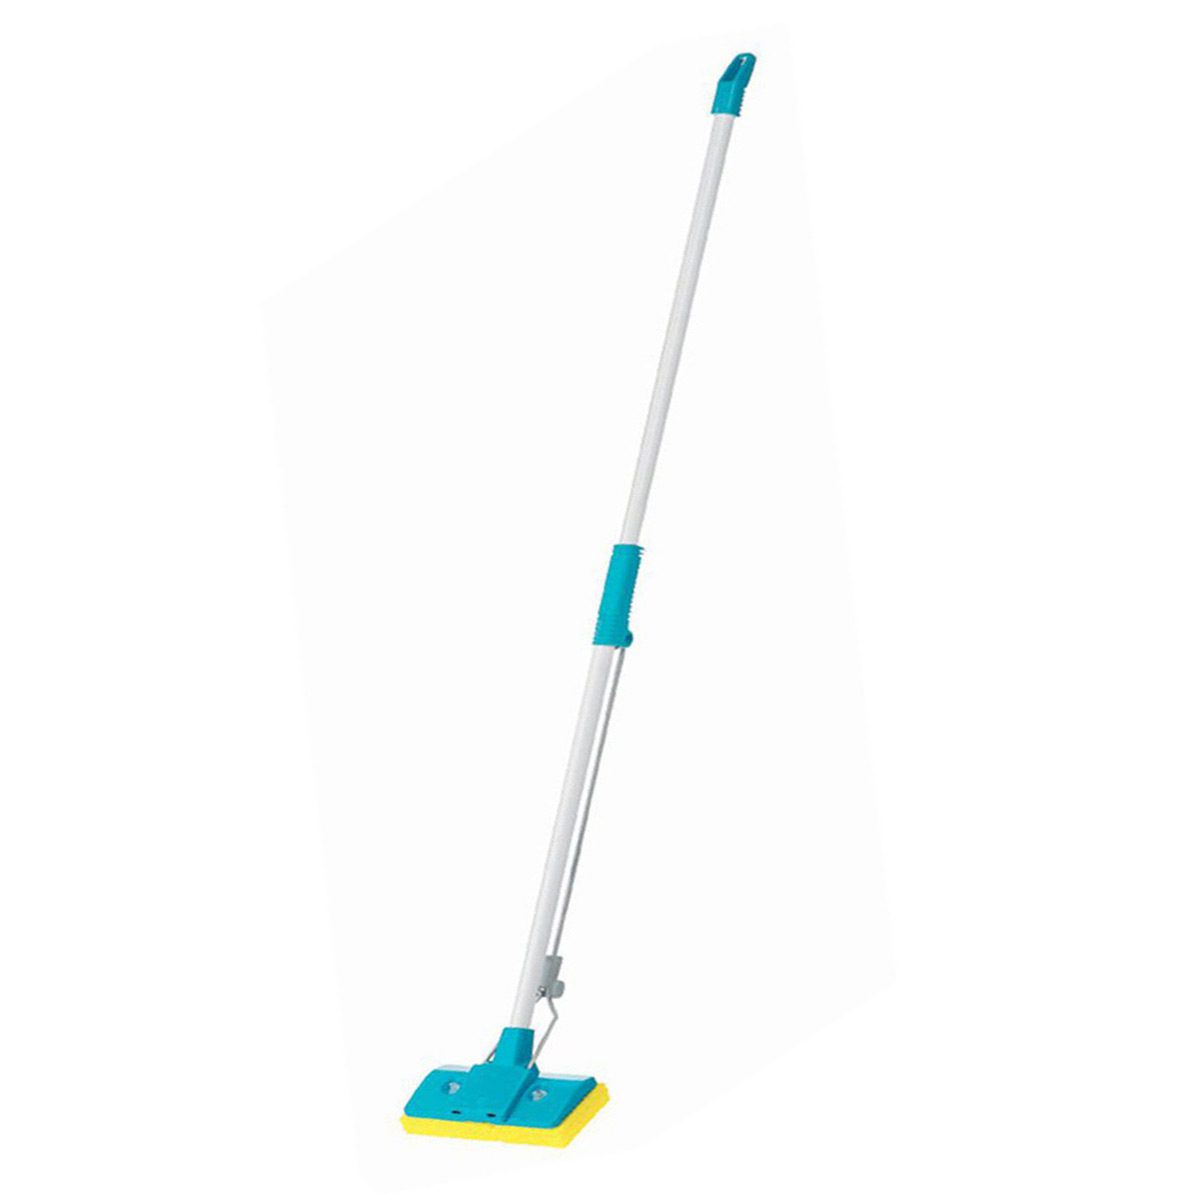 cleaning-equipment-mops-mop-a-matic-2-bolt--sprint-squeeze-mop-complete-highly-absorbent-100%-cellulose-sponge-strong-corrosion-resistant-powder-coated-steel-handle-non-slip-grips-vjs-distributors-RB2001